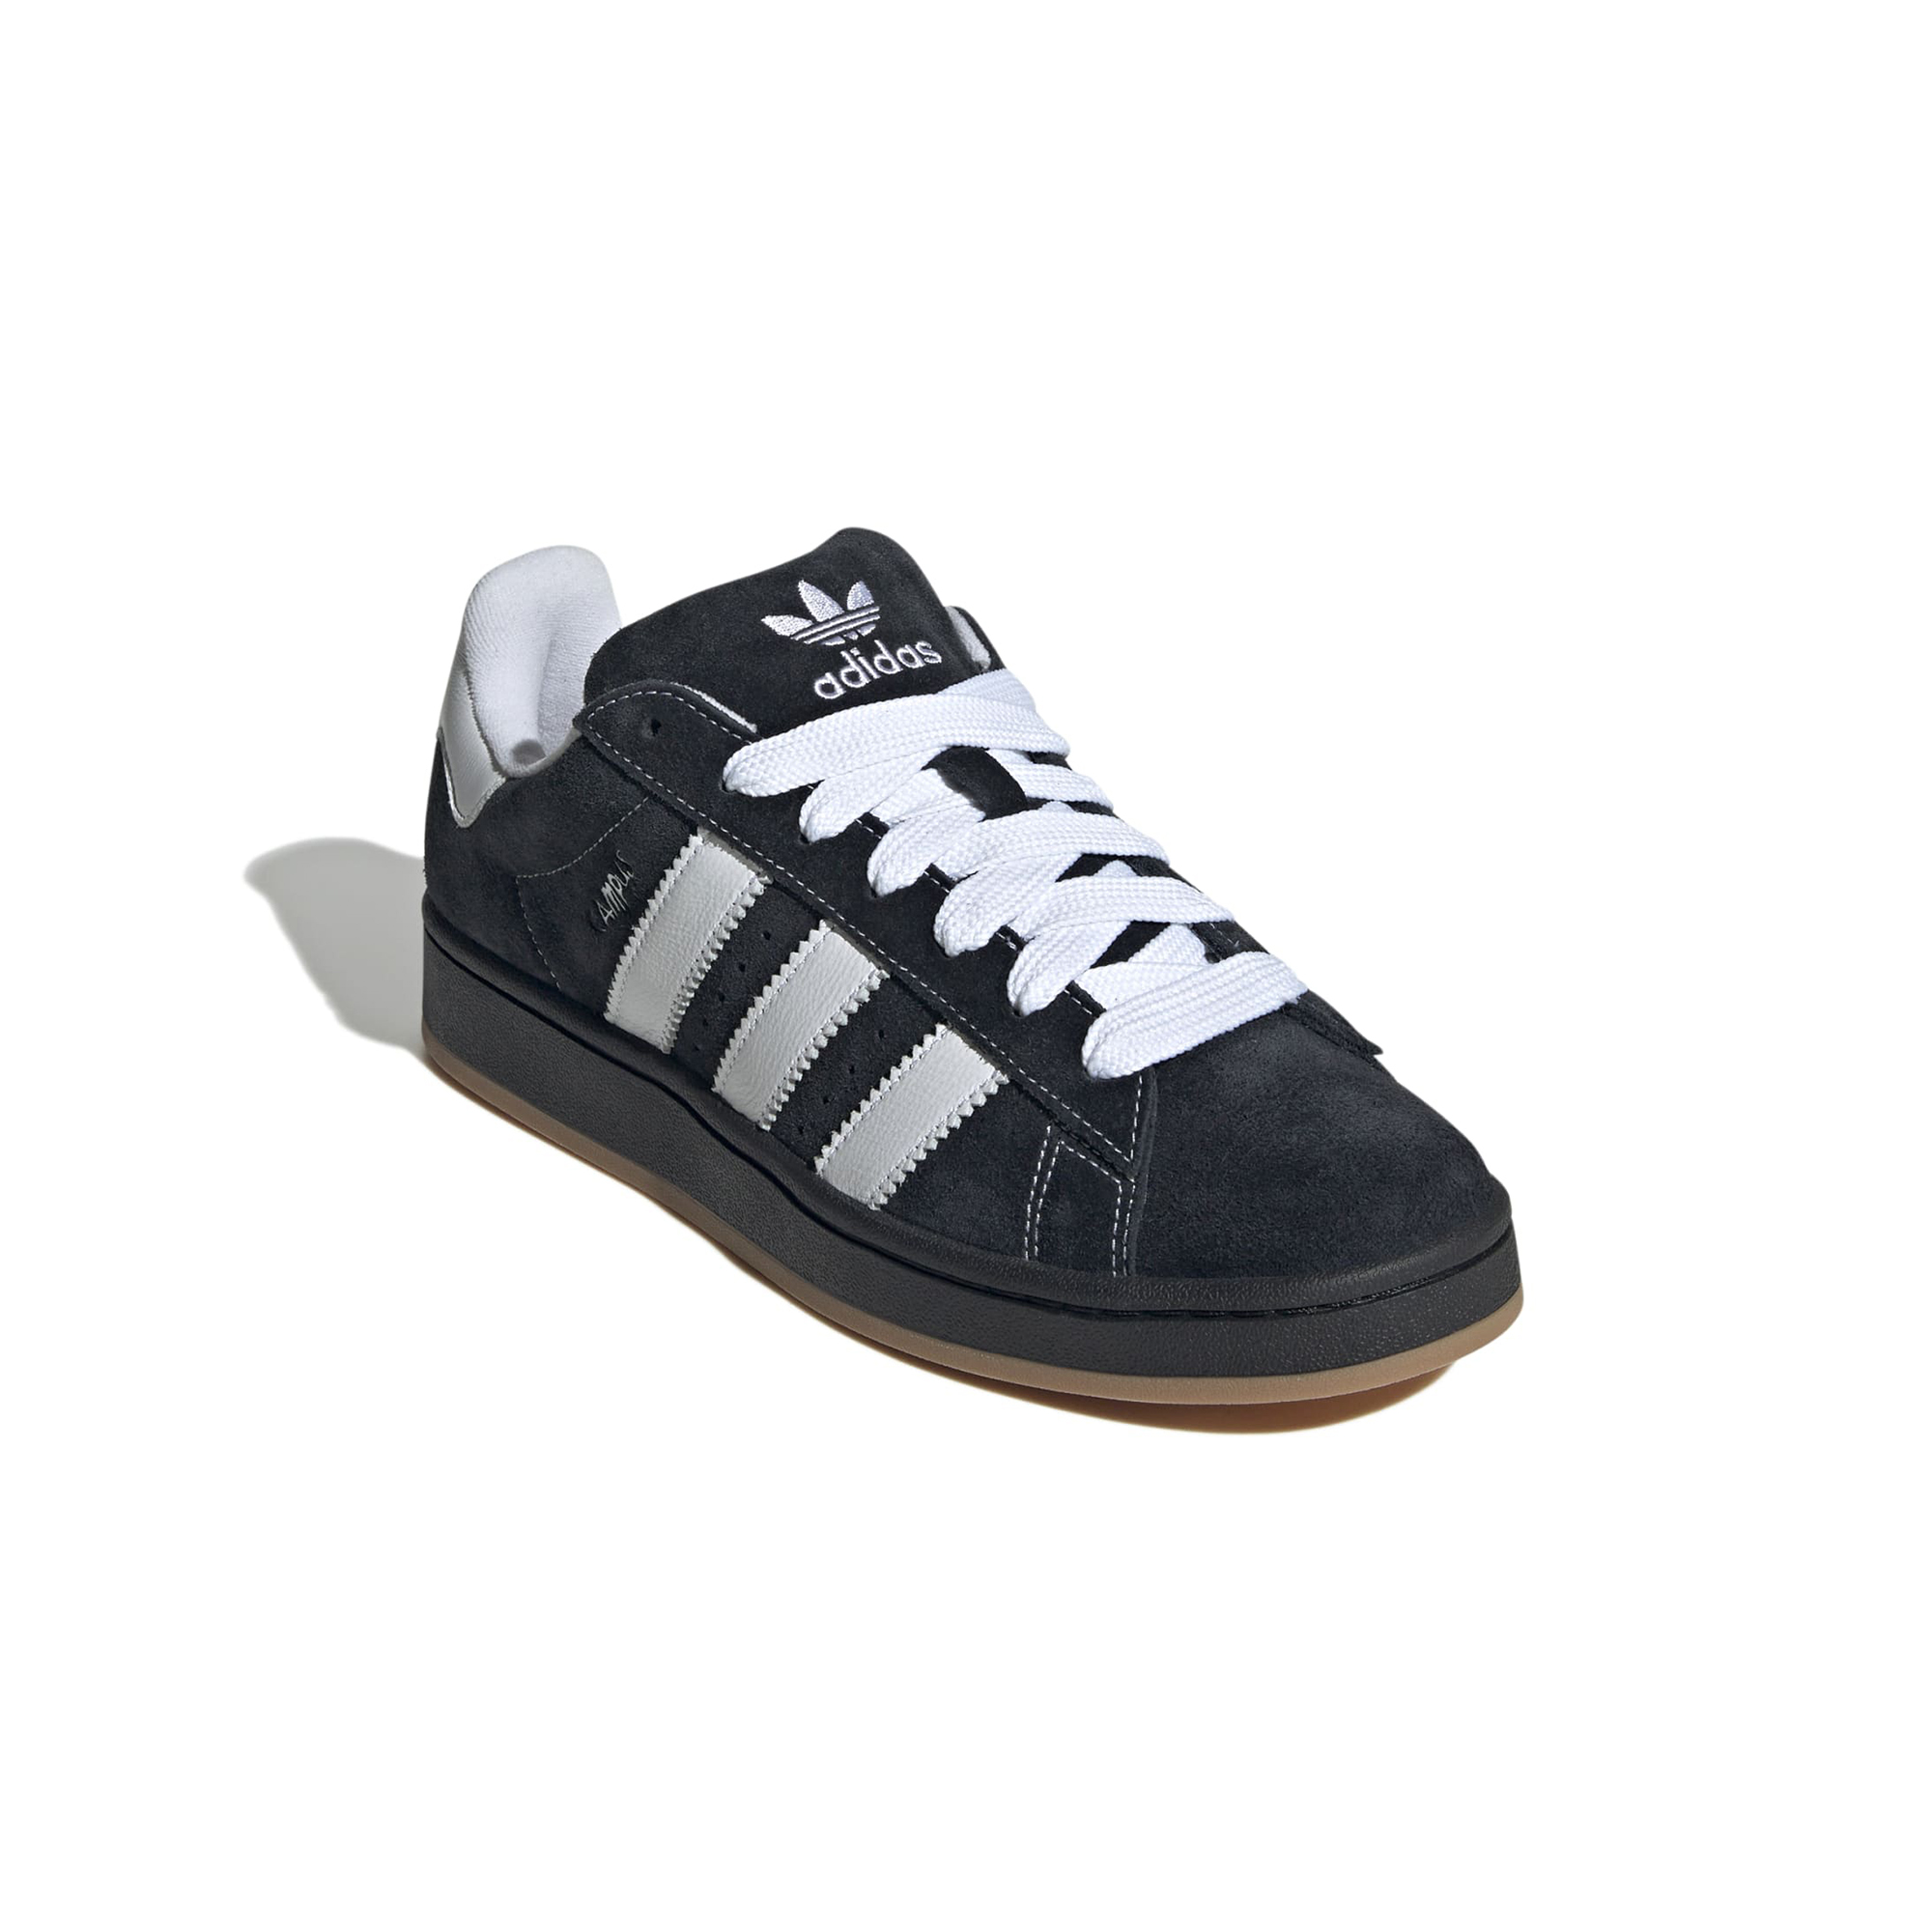 Adidas x Korn Campus 00s Shoes